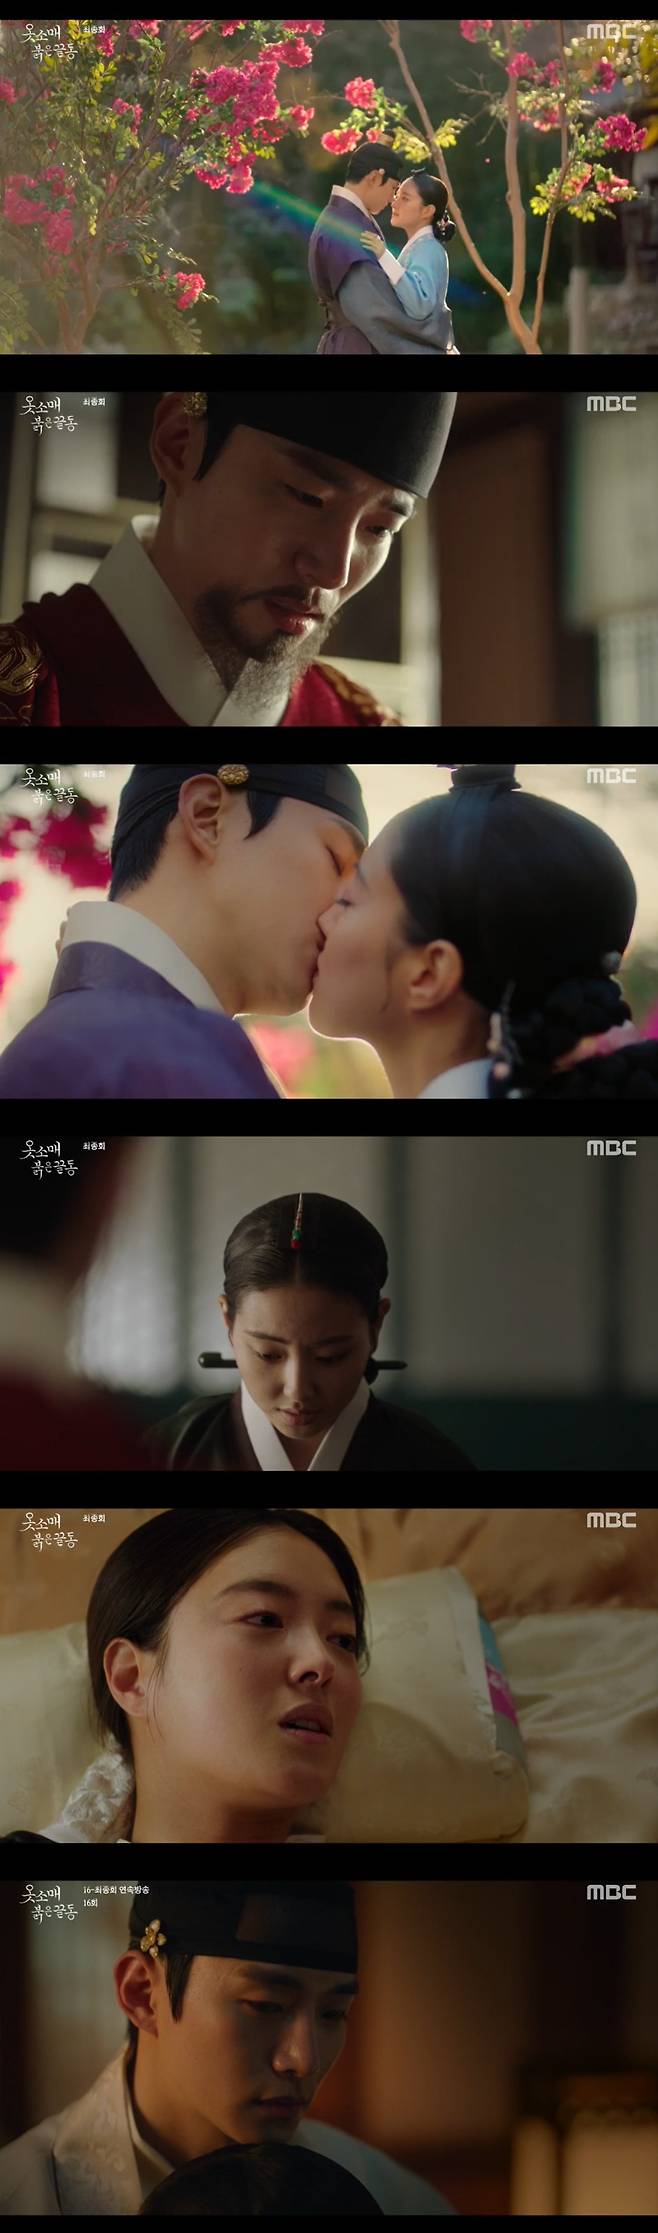 Seoul = = Red End of Clothes Retail Lee Joon-ho and Lee Se-young promised eternal love only after closing their eyes.MBCs gilt drama Red End of Clothes Retail (playplay by Jeong Hae-ri/directed by Jung Ji-in and Song Yeon-hwa) was broadcast on the afternoon of the 1st, and in the 16th and 17th episodes, Lee Joon-ho and Sung Deok-im (Lee Se-young) were shown enjoying the happy moment of love that they could not achieve in life as eternity on the other side of life.On this day, Lee Sang-eun made Confessions of his mind to Sung Duk-im, who did not think that he wanted to stay in his place even in the heart of such a separation.Meanwhile, Hwa Bin Yoon (Lee Seo-Bun) met Queen Jinsun (Jang Hee-jin) and asked for help, talking about the life of the concubine, which would be useless if she could not have children.So Queen Jinsun referred to the sexuality of Hubins claim to the sexuality (Yang Byeong-yeol).Queen Jinsun asked Isan to withdraw his exile of his brother, Kim, in order to save his virtue, but Isan did not bow his will until the end.Lee Hye-bin Hong (Kang Mal-geum) appeared in the midst of this, explaining that sexuality and Sung Deok-im are brother and sister relations.However, Hwabin demanded punishment for Sungdeok to the end, noting that Sung Duk-ims father was a person who served the apostle.She was angry at the story of the painter and stressed that she was the son of the apostle. After leaving the place, she told Seo Sang-gung to put Sungdeok in her sediment.As the situation went so far, Queen Jinsun eventually turned his back on Hubin, and Hubin now has no one to rely on at the palace.Sung Duk-im later entered the sedimentary settlement and wore the seungeun.Here, Sung Duk-im rejected Seungeun, but Lee Sang-eun took out his heart and made Confessions of Sung Duk-im.So Sung Duk-im moved his mind, and the two kissed and confirmed his love. Sung Duk-im, wearing Seungeun, became a concubine, not a courtesan.Sung Duk-im, who became a concubine, missed the dissociation that did not find him after wearing the Seungeun, and Isan found Sungdeok and said, I wanted to give you time to organize your thoughts.Sung Duk Lim felt a complicated mind to such a dissemination, but Issan treated Sung Duk-im sincerely, saying, I will not let it go.Even afterward, she found her sanctity and soothed her dizzy mind. Over time, she became pregnant.After hearing the news of Sung Duk-ims pregnancy, she was glad to find Sung Duk-im and then turned her back to wonder, in order to get what she did not do first.Since then, Isan has congratulated her pregnancy by finding Sungdeok early in the morning.It was a virtue that gave birth to Moon Hyo-seja, but soon after, Moon Hyo-seja was suffering from measles at a young age, and eventually left the world.The dissociation, which lost his young son, shed tears, and Sung Duk-im could not join the end of Moon Hyo-seja because he was in office.Lee Hye-bin, who watched this, also shed tears beside her.After Moon Hyo-seja passed away, Sung Duk-im broke the curvature and lay down on his seat. She was filled with such virtues, but she was worried about her in her heart.After that, Sung Duk-im recovered his health, but he was told that Son Young-hee (Lee Eun-sam) had secretly had a child and had a miscarriage.So Sung Duk-im went to meet Son Young-hee secretly, and Son Young-hee apologized to Sung Duk-im for all of this because of his fault and sent him back.Sung Duk-im understood the feelings of the separation of the past, but was saddened by the fact that he lost his friend, Son Young-hee.However, thanks to the comfort of Kim Bok-yeon (Lee Min-ji), a courtier friend, Bae Gyeong-hee (Ha Yuli), Sung Duk-im was able to catch up.After that, Sungdeokim was in bad health. She was worried about the sudden collapse of Sungdeokim, and the people of the palace were worried about Sungdeokim.As his health continued to deteriorate, he realized that he was his last, and found Kim Bok-yeon and Bae Gyeong-hee.Isan found Sungdeok in a hurry, but she shed tears, regretting that Sungdeokim, who was looking for his comrades before him, said, If you were a lady, you would not have forced me to become a concubine.Sung Duk-im told Isan, Even if you meet your next life, please pass by as you do not know. I do not hate to blame, but in the next life, I just want to live as you want.Lee said, Did not you give me a little bit of love? He asked, Did not you give me a very small heart?Sung Duk-im said to such a dissenter, I do not know yet, if I did not like it, I would have run away at all costs. I do not know that it was my choice to stay with the King in the end.Sung Duk-im had to look in front of her, and she had to leave her with tears.After leaving Sungdeokim, Lee had brought Suvin Park as a new concubine, but he still did not forget that he was a saint. He vowed to forget that he would forget his duty as a king.After a while, Lee met an old man (Lee Soon-jae) who was older and raised his accomplishments to the unidentified Lee, saying, This Taepyeongseongdae has never been before.Later, while looking at the soldiers, Isan met Sung Duk-ims nephew, and he was appointed as an employee of Kim Woo-young, in spite of his skills.Isan recalled the virtue that he had forgotten, saying, Five days later, it is the anniversary of Uibin. He recalled memories with him.Bae Gyeong-hee, who became a manufacturing palace, met with the dissemination that he was looking for a person who remembered Sungdeok, and informed him that Kim Bok-yeon also left the world.Bae Gyeong-hui said that all of his comrades passed away early, but that they would still wait for him.Bae Gyeong-hee brought the remains of Sung Duk-im to the mountain, and the mountain once again recalled the love for him by watching the remains of Sung Duk-im.So Isan closed his eyes at the last moment, and when he opened his eyes, he lay on his lap and had a nightmare. In that moment, Isan acted differently from the past, seeing that he was a smiling virtue.In the meantime, Isan told Sung Duk-im what he wanted to say, and he did not leave for this world and enjoyed the time of Sung Duk-im and eternal happiness on the other side of life.